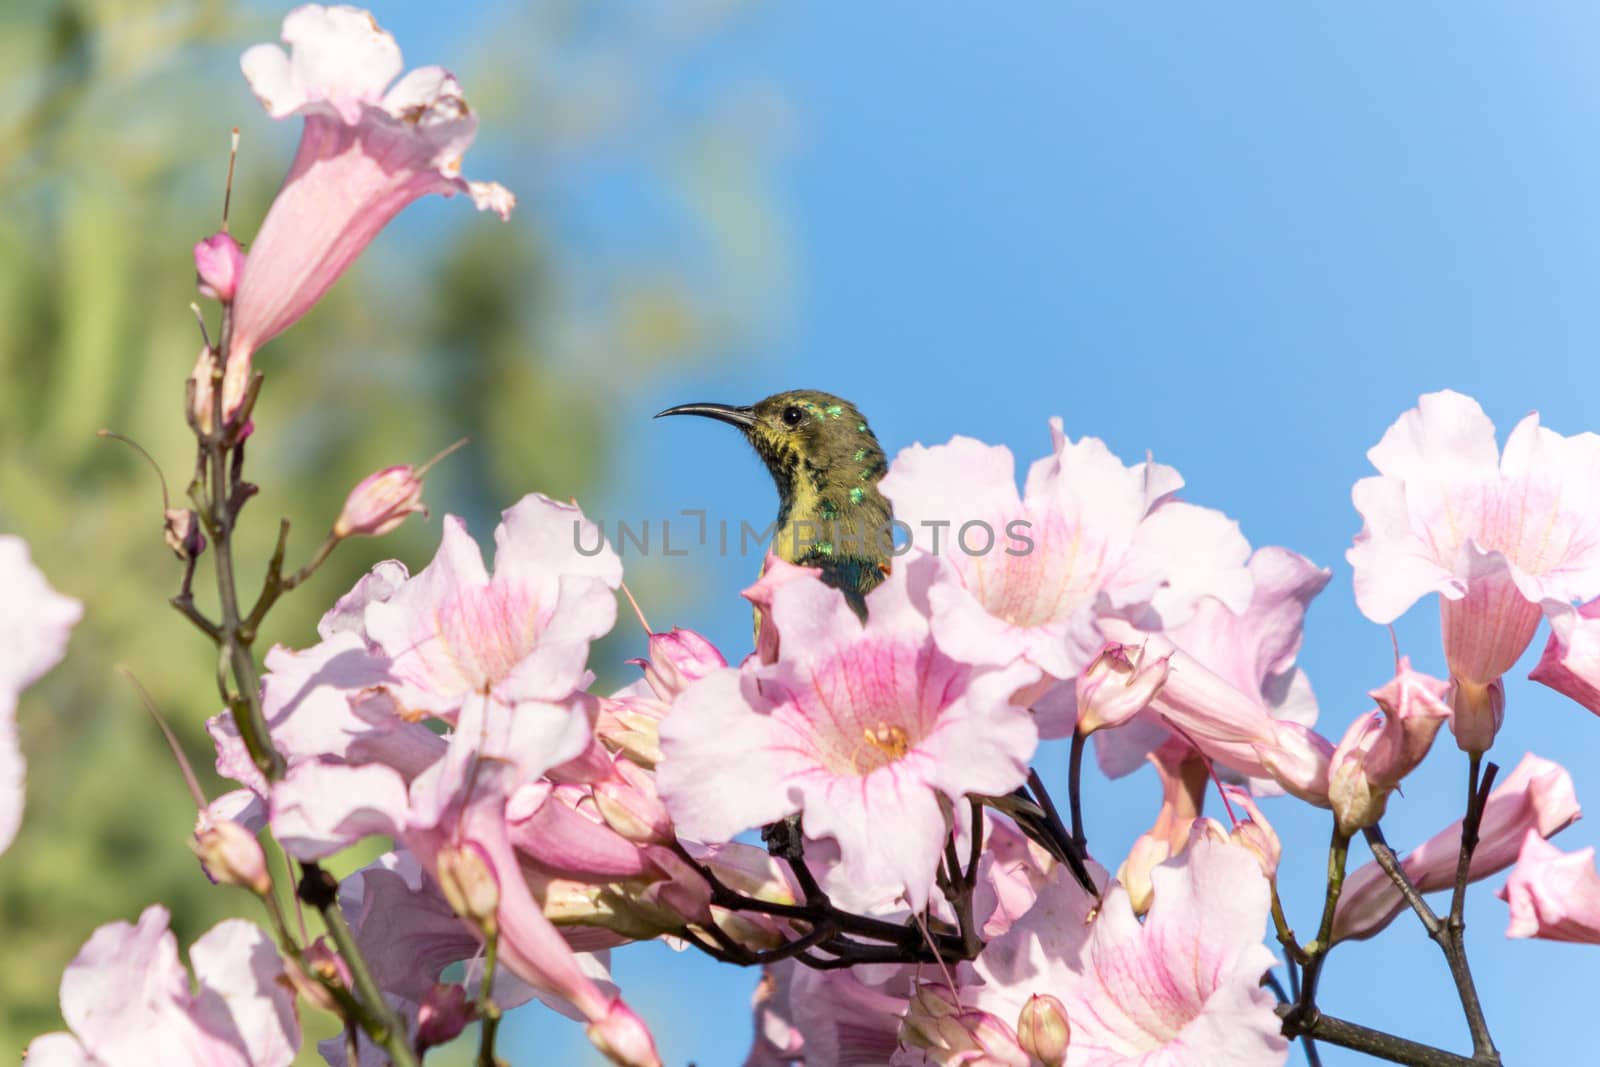 Beautiful bird in the flowers by derejeb